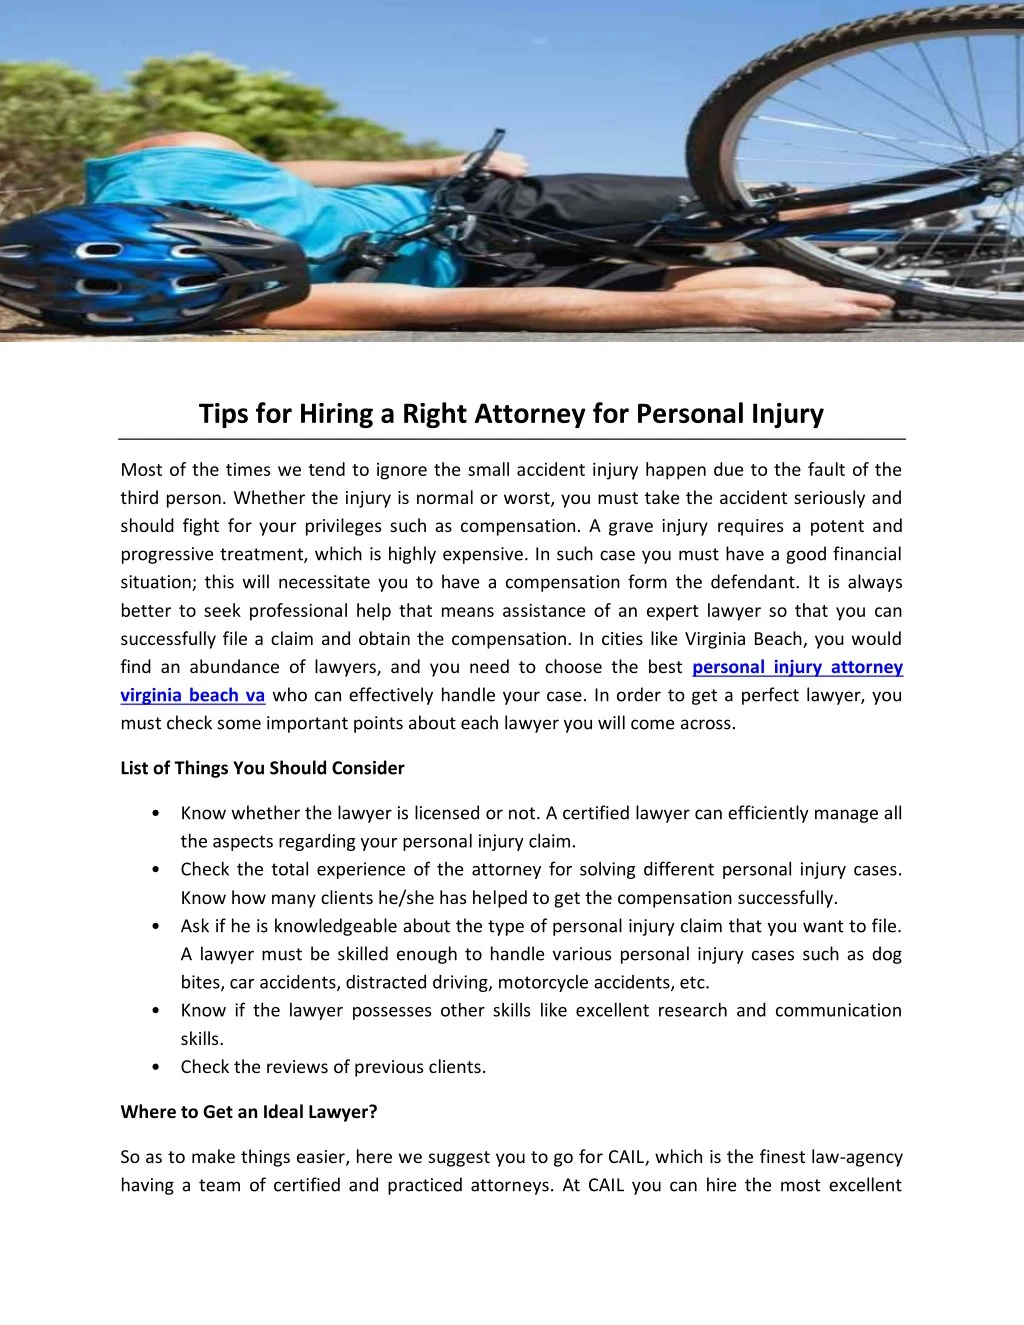 tips for hiring a right attorney for personal